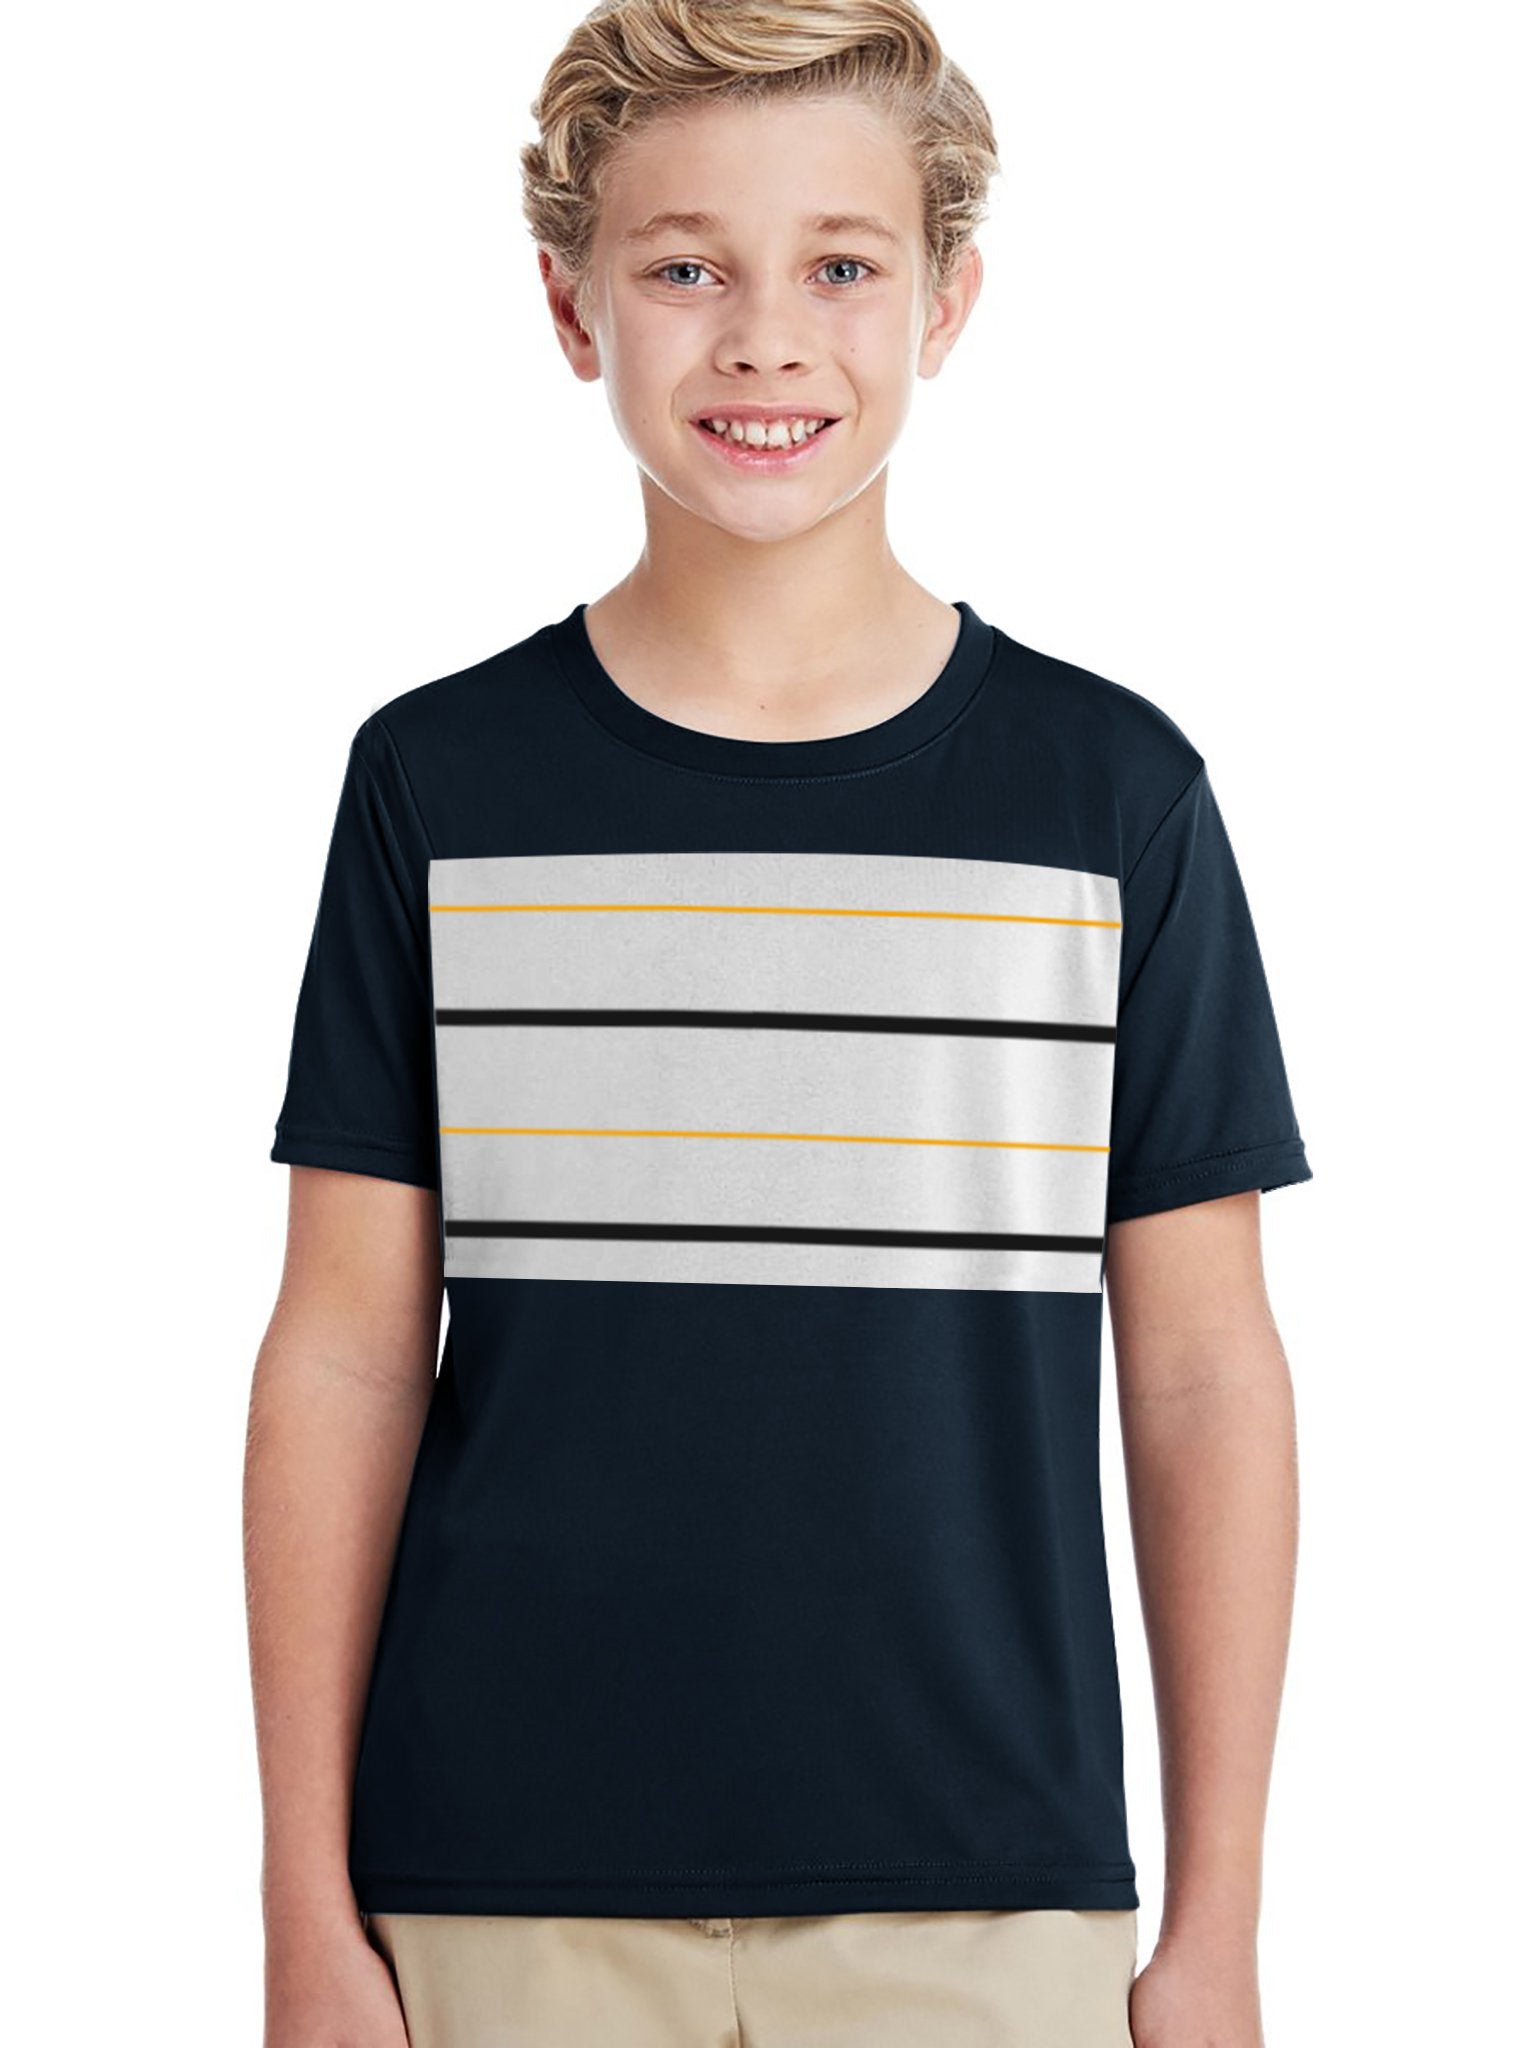 NXT Crew Neck Single Jersey Tee Shirt For Kids-Navy & White with Stripes-SP2288